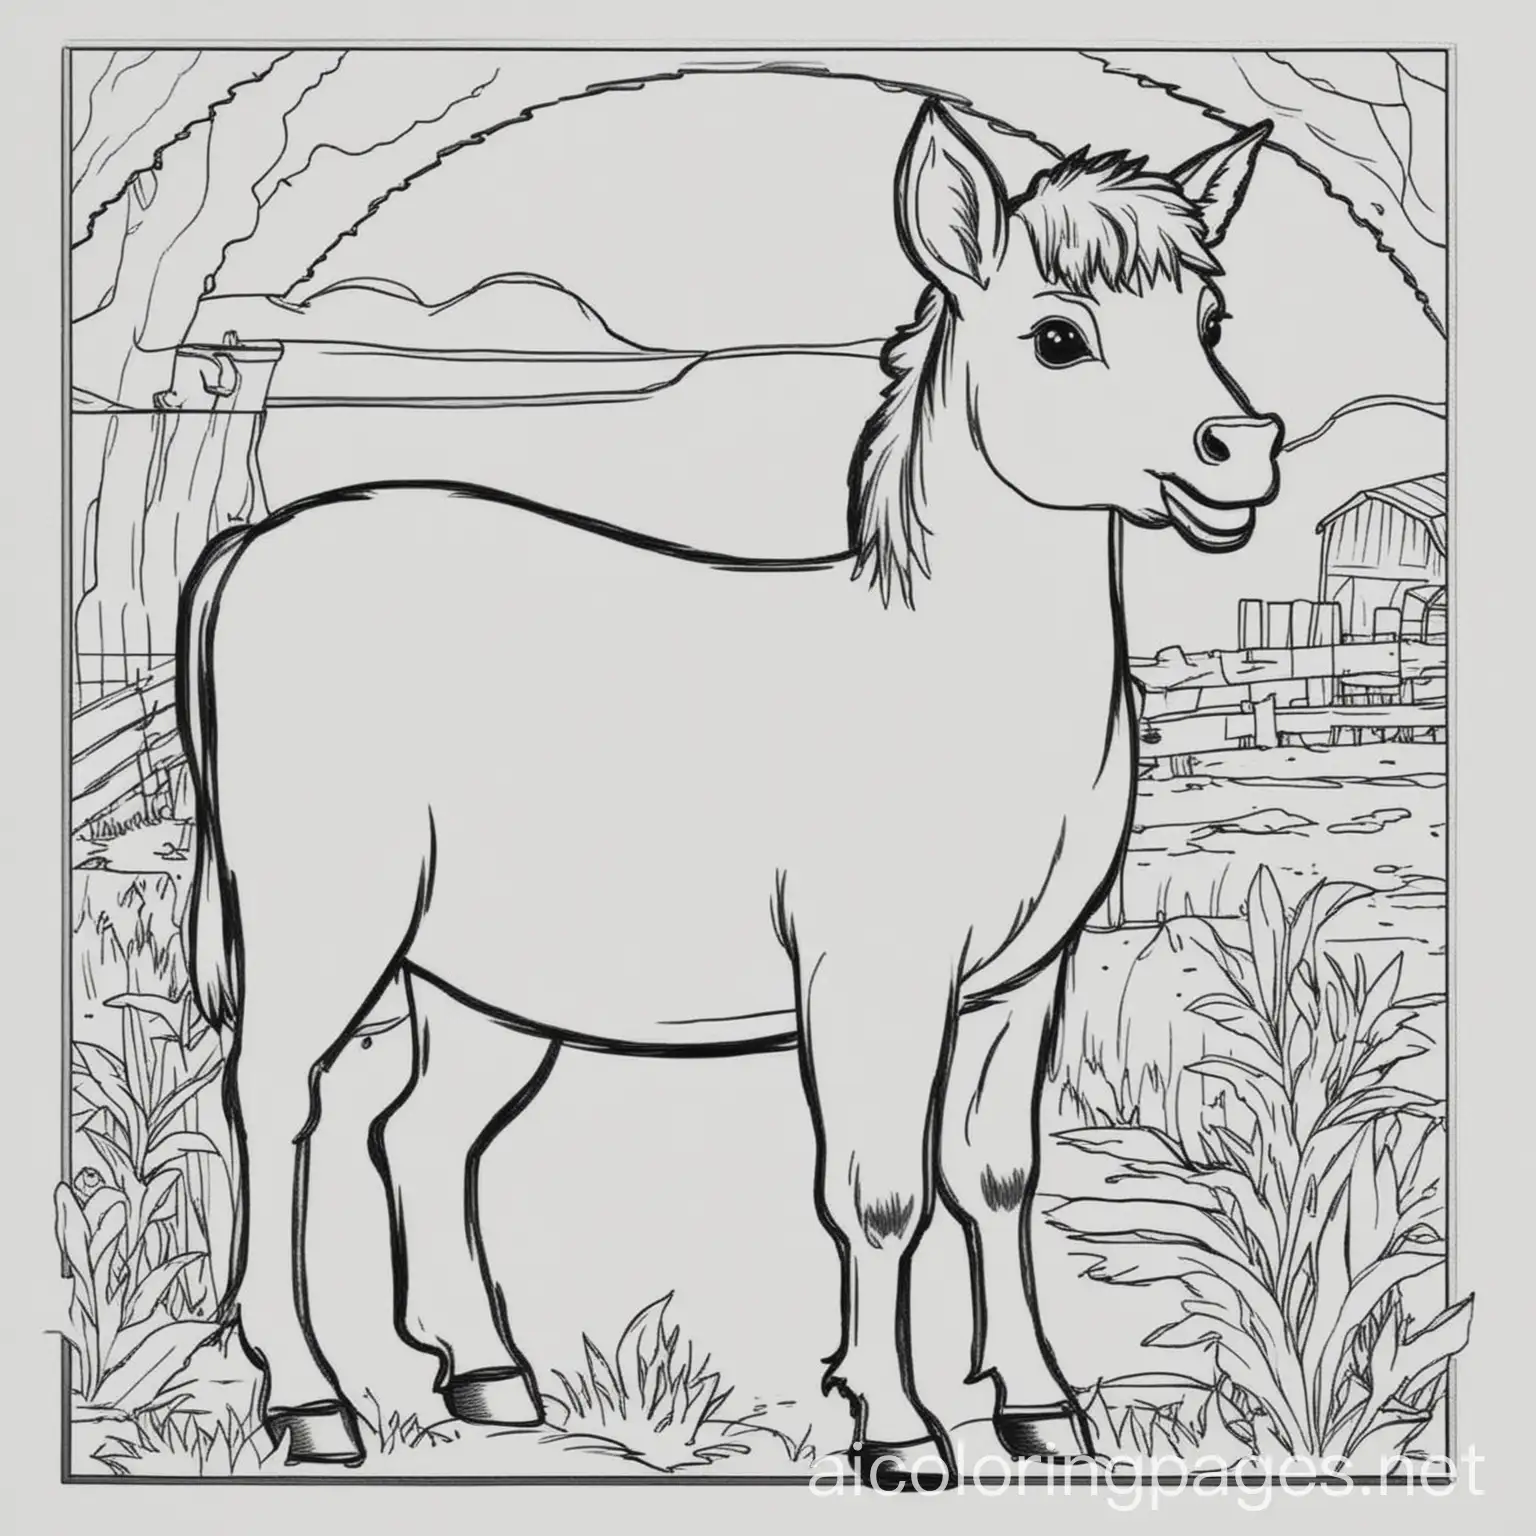 Farm-Animal-Coloring-Page-for-Kids-Simple-Line-Art-on-White-Background